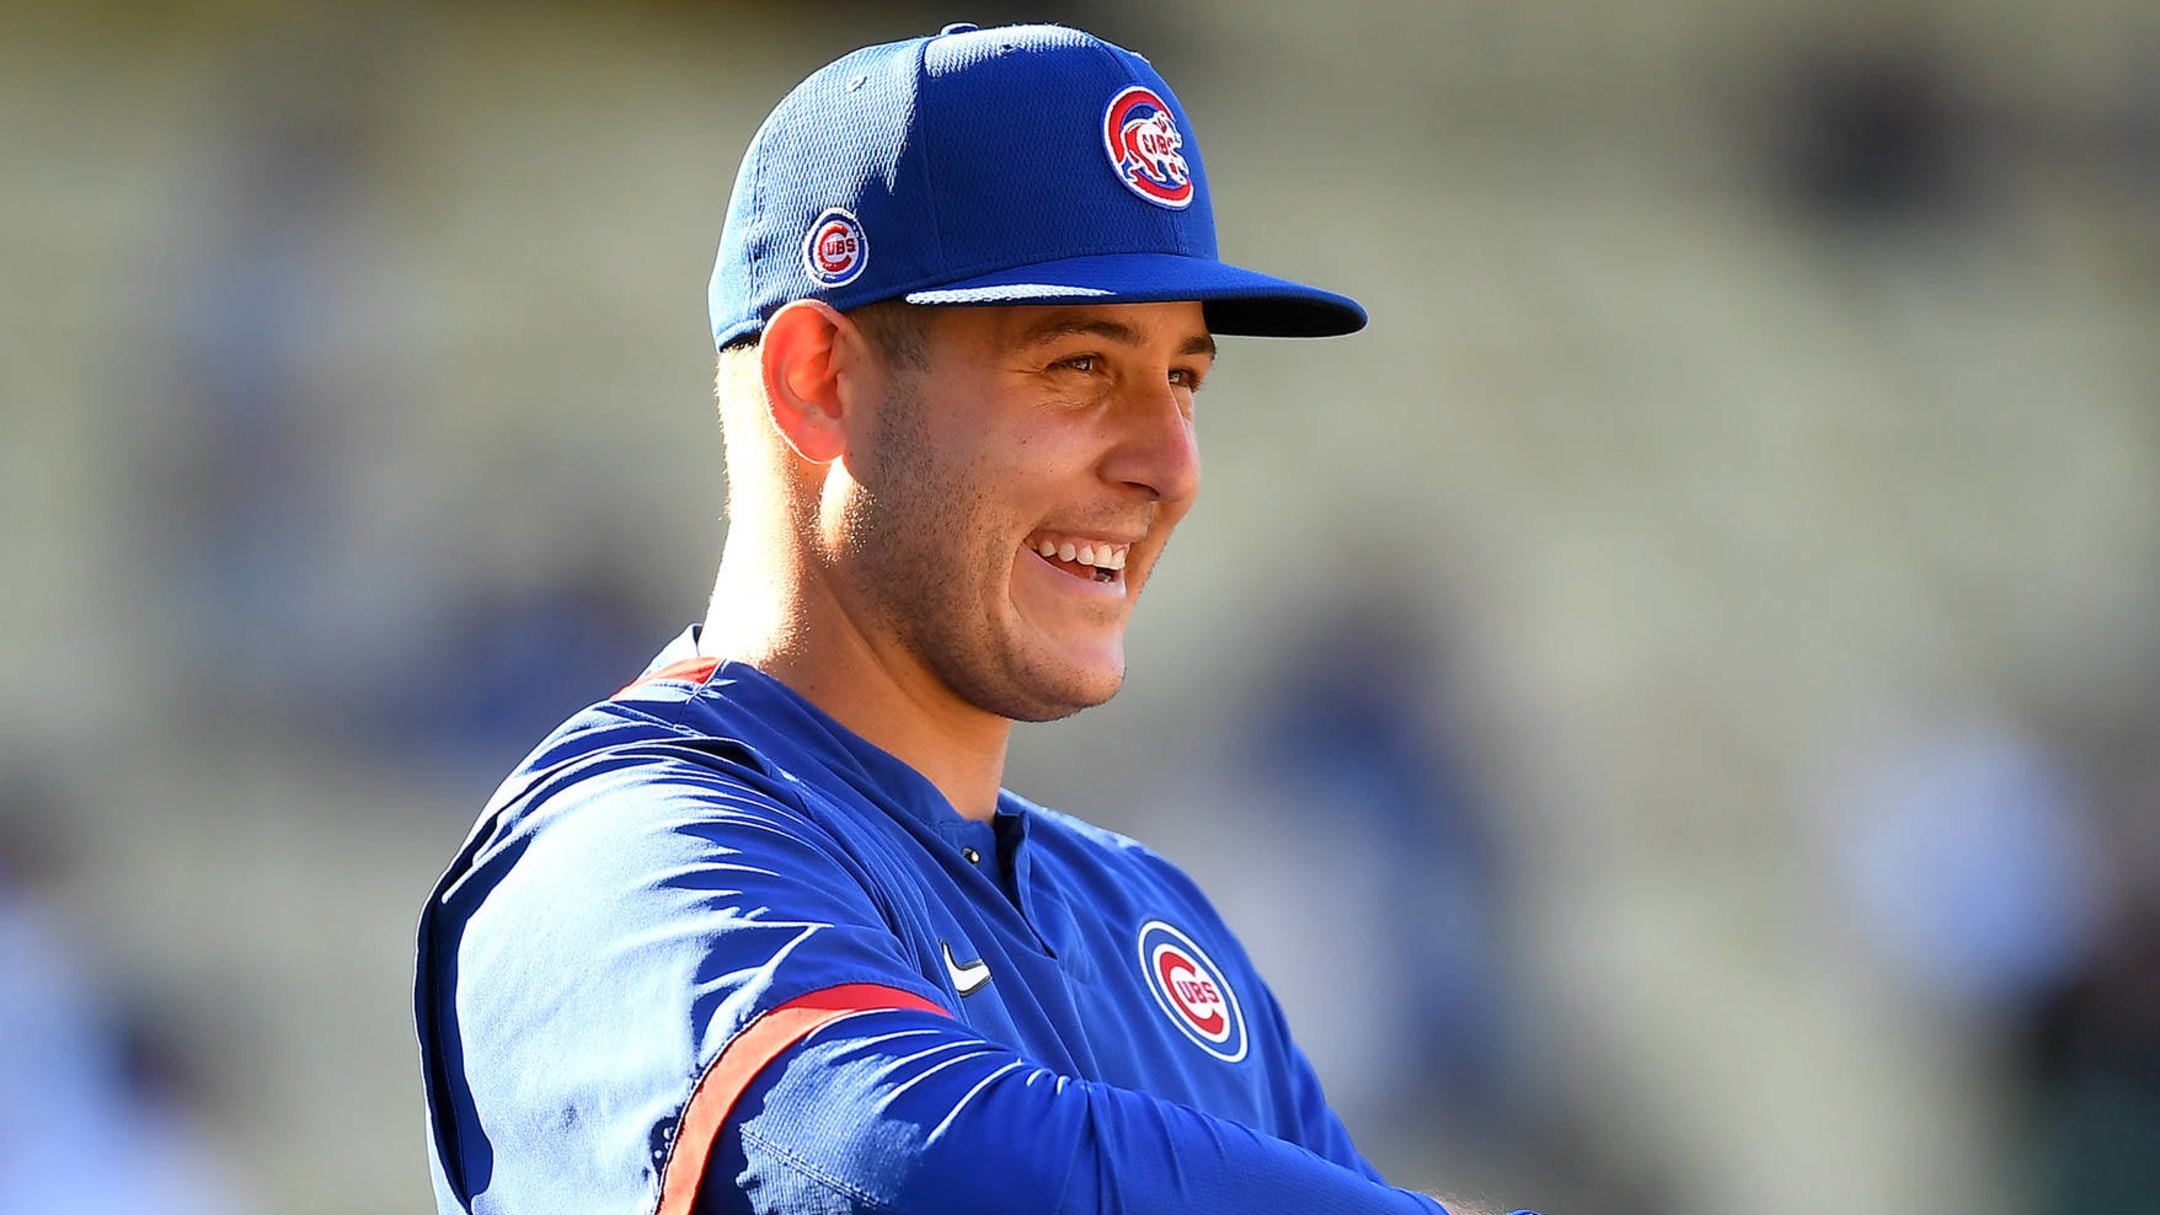 Paul Lukas on X: Javy Baez of the Cubs has long had an MLB logo